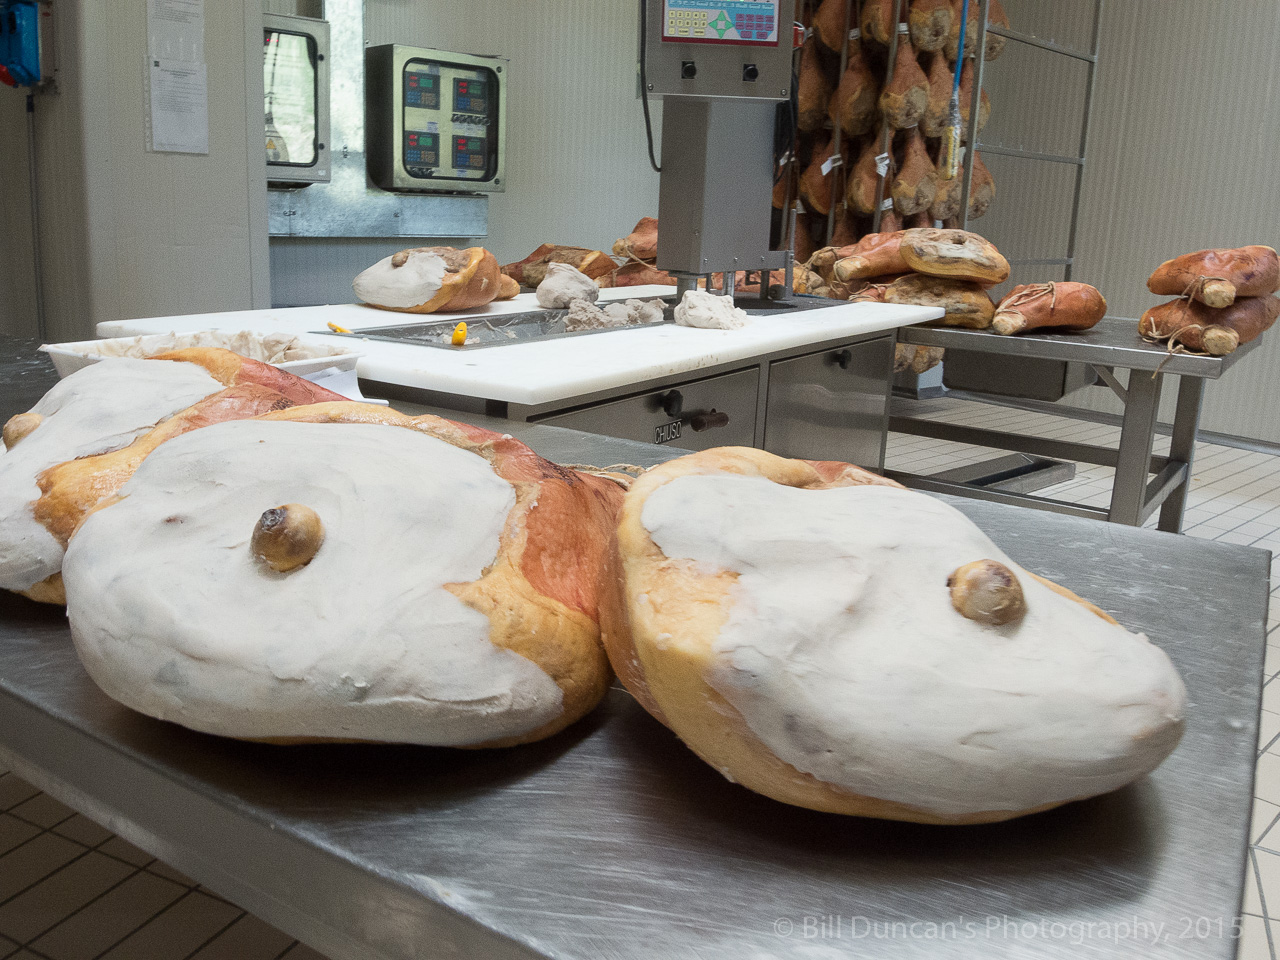 Early in the process of preparing the hams.